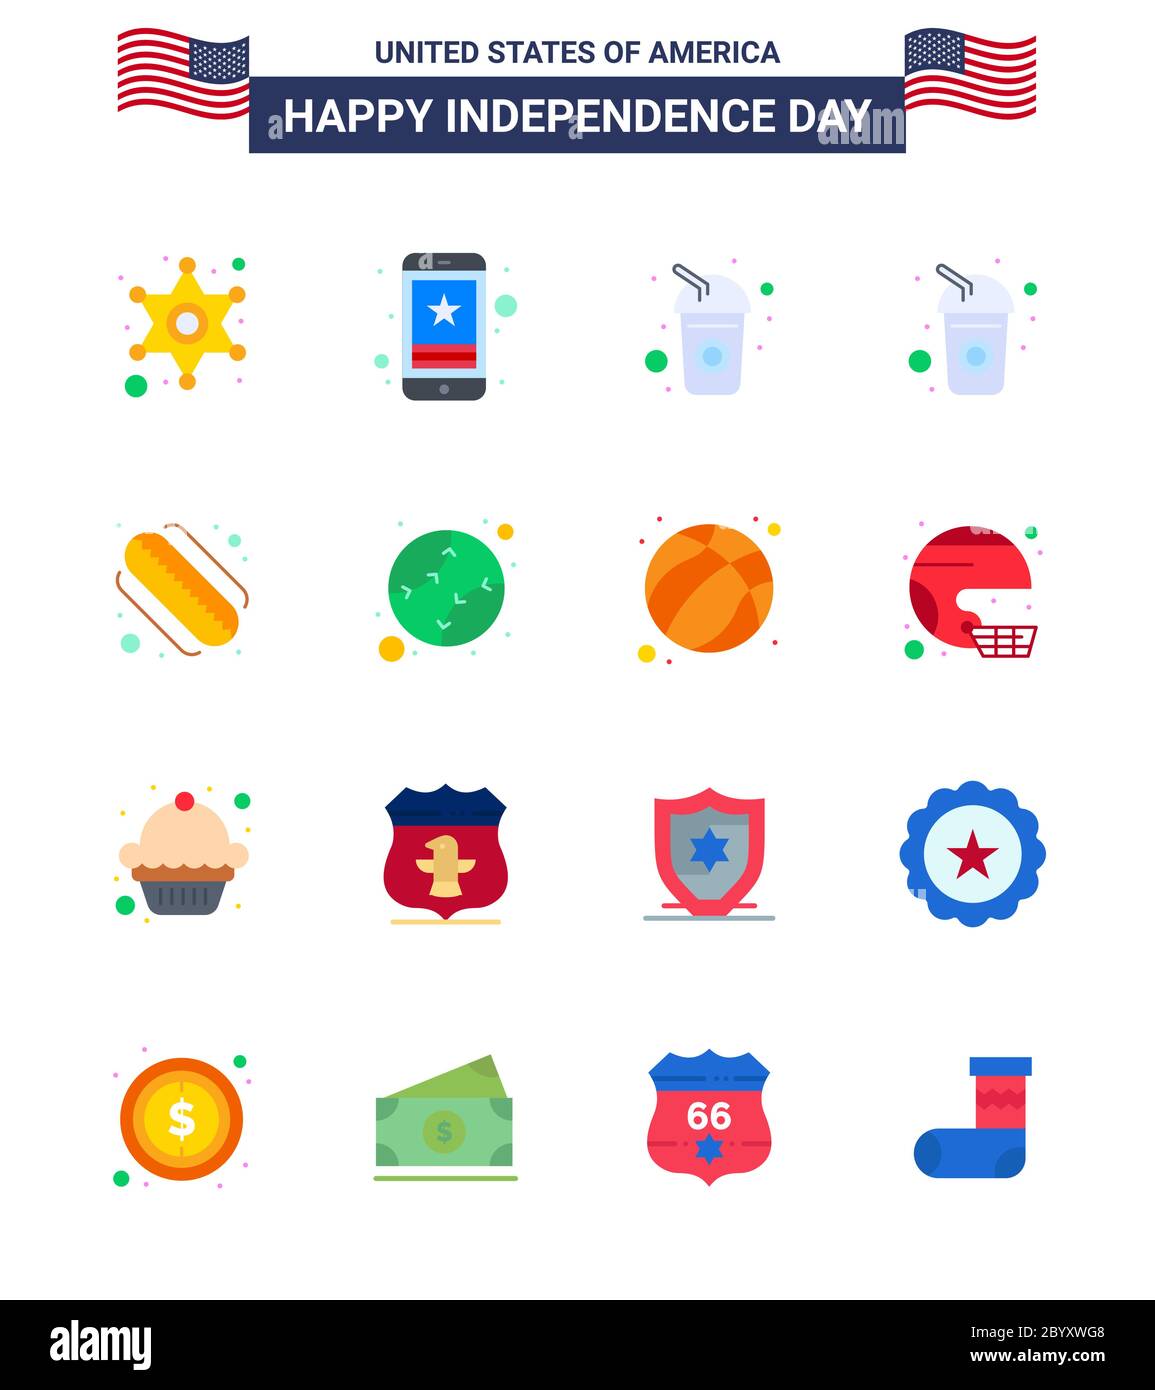 https://c8.alamy.com/comp/2BYXWG8/happy-independence-day-16-flats-icon-pack-for-web-and-print-baseball-states-phone-hotdog-soda-editable-usa-day-vector-design-elements-2BYXWG8.jpg